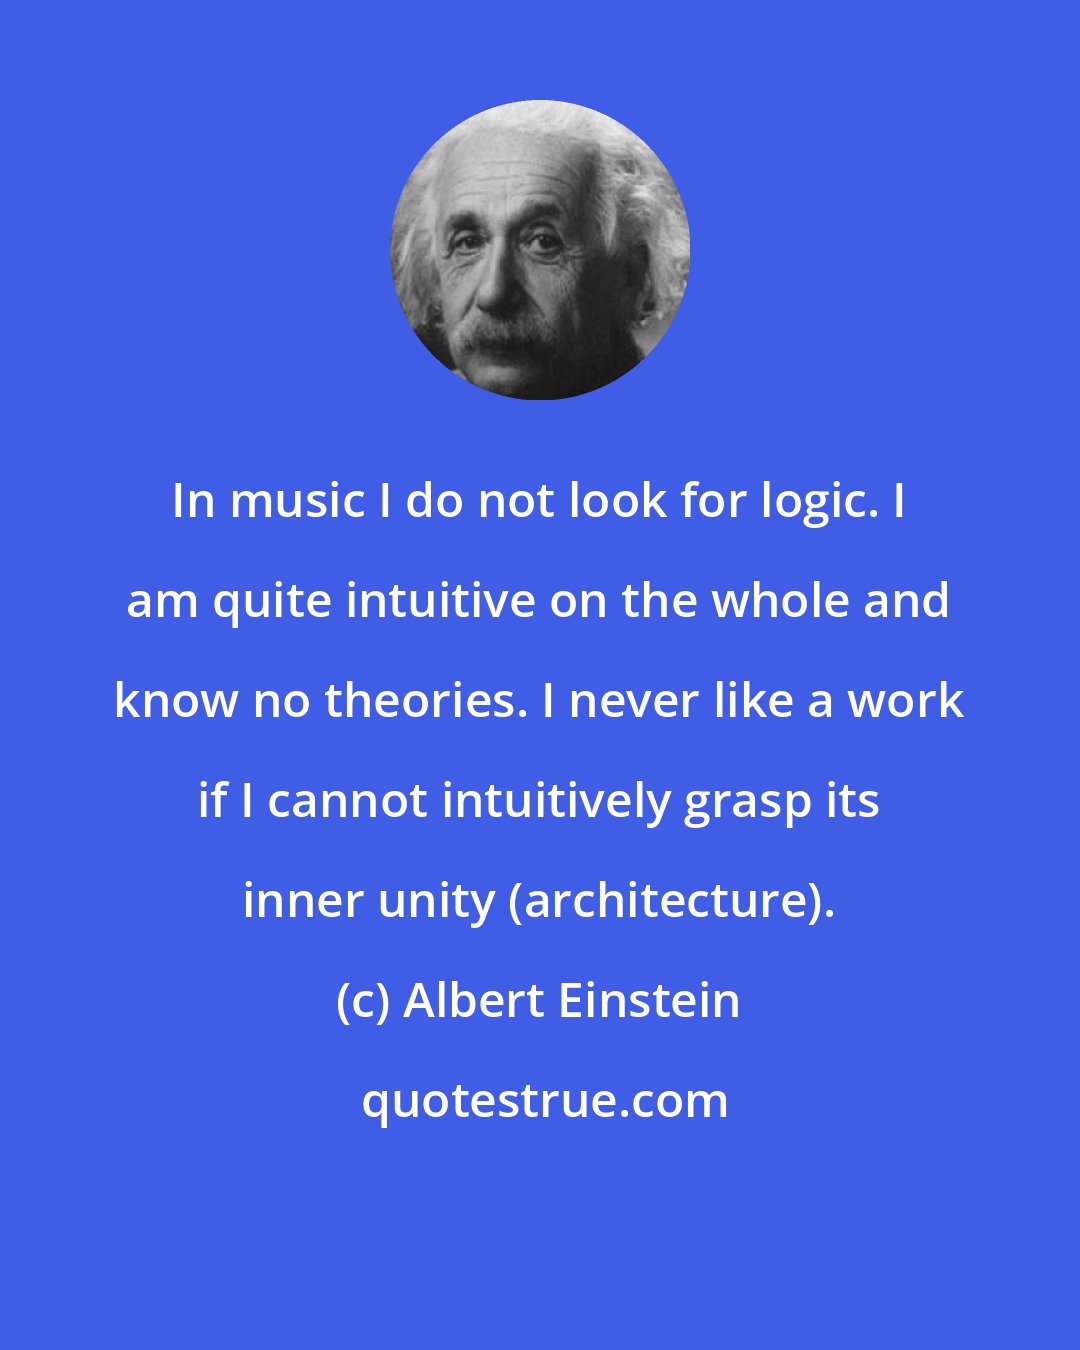 Albert Einstein: In music I do not look for logic. I am quite intuitive on the whole and know no theories. I never like a work if I cannot intuitively grasp its inner unity (architecture).